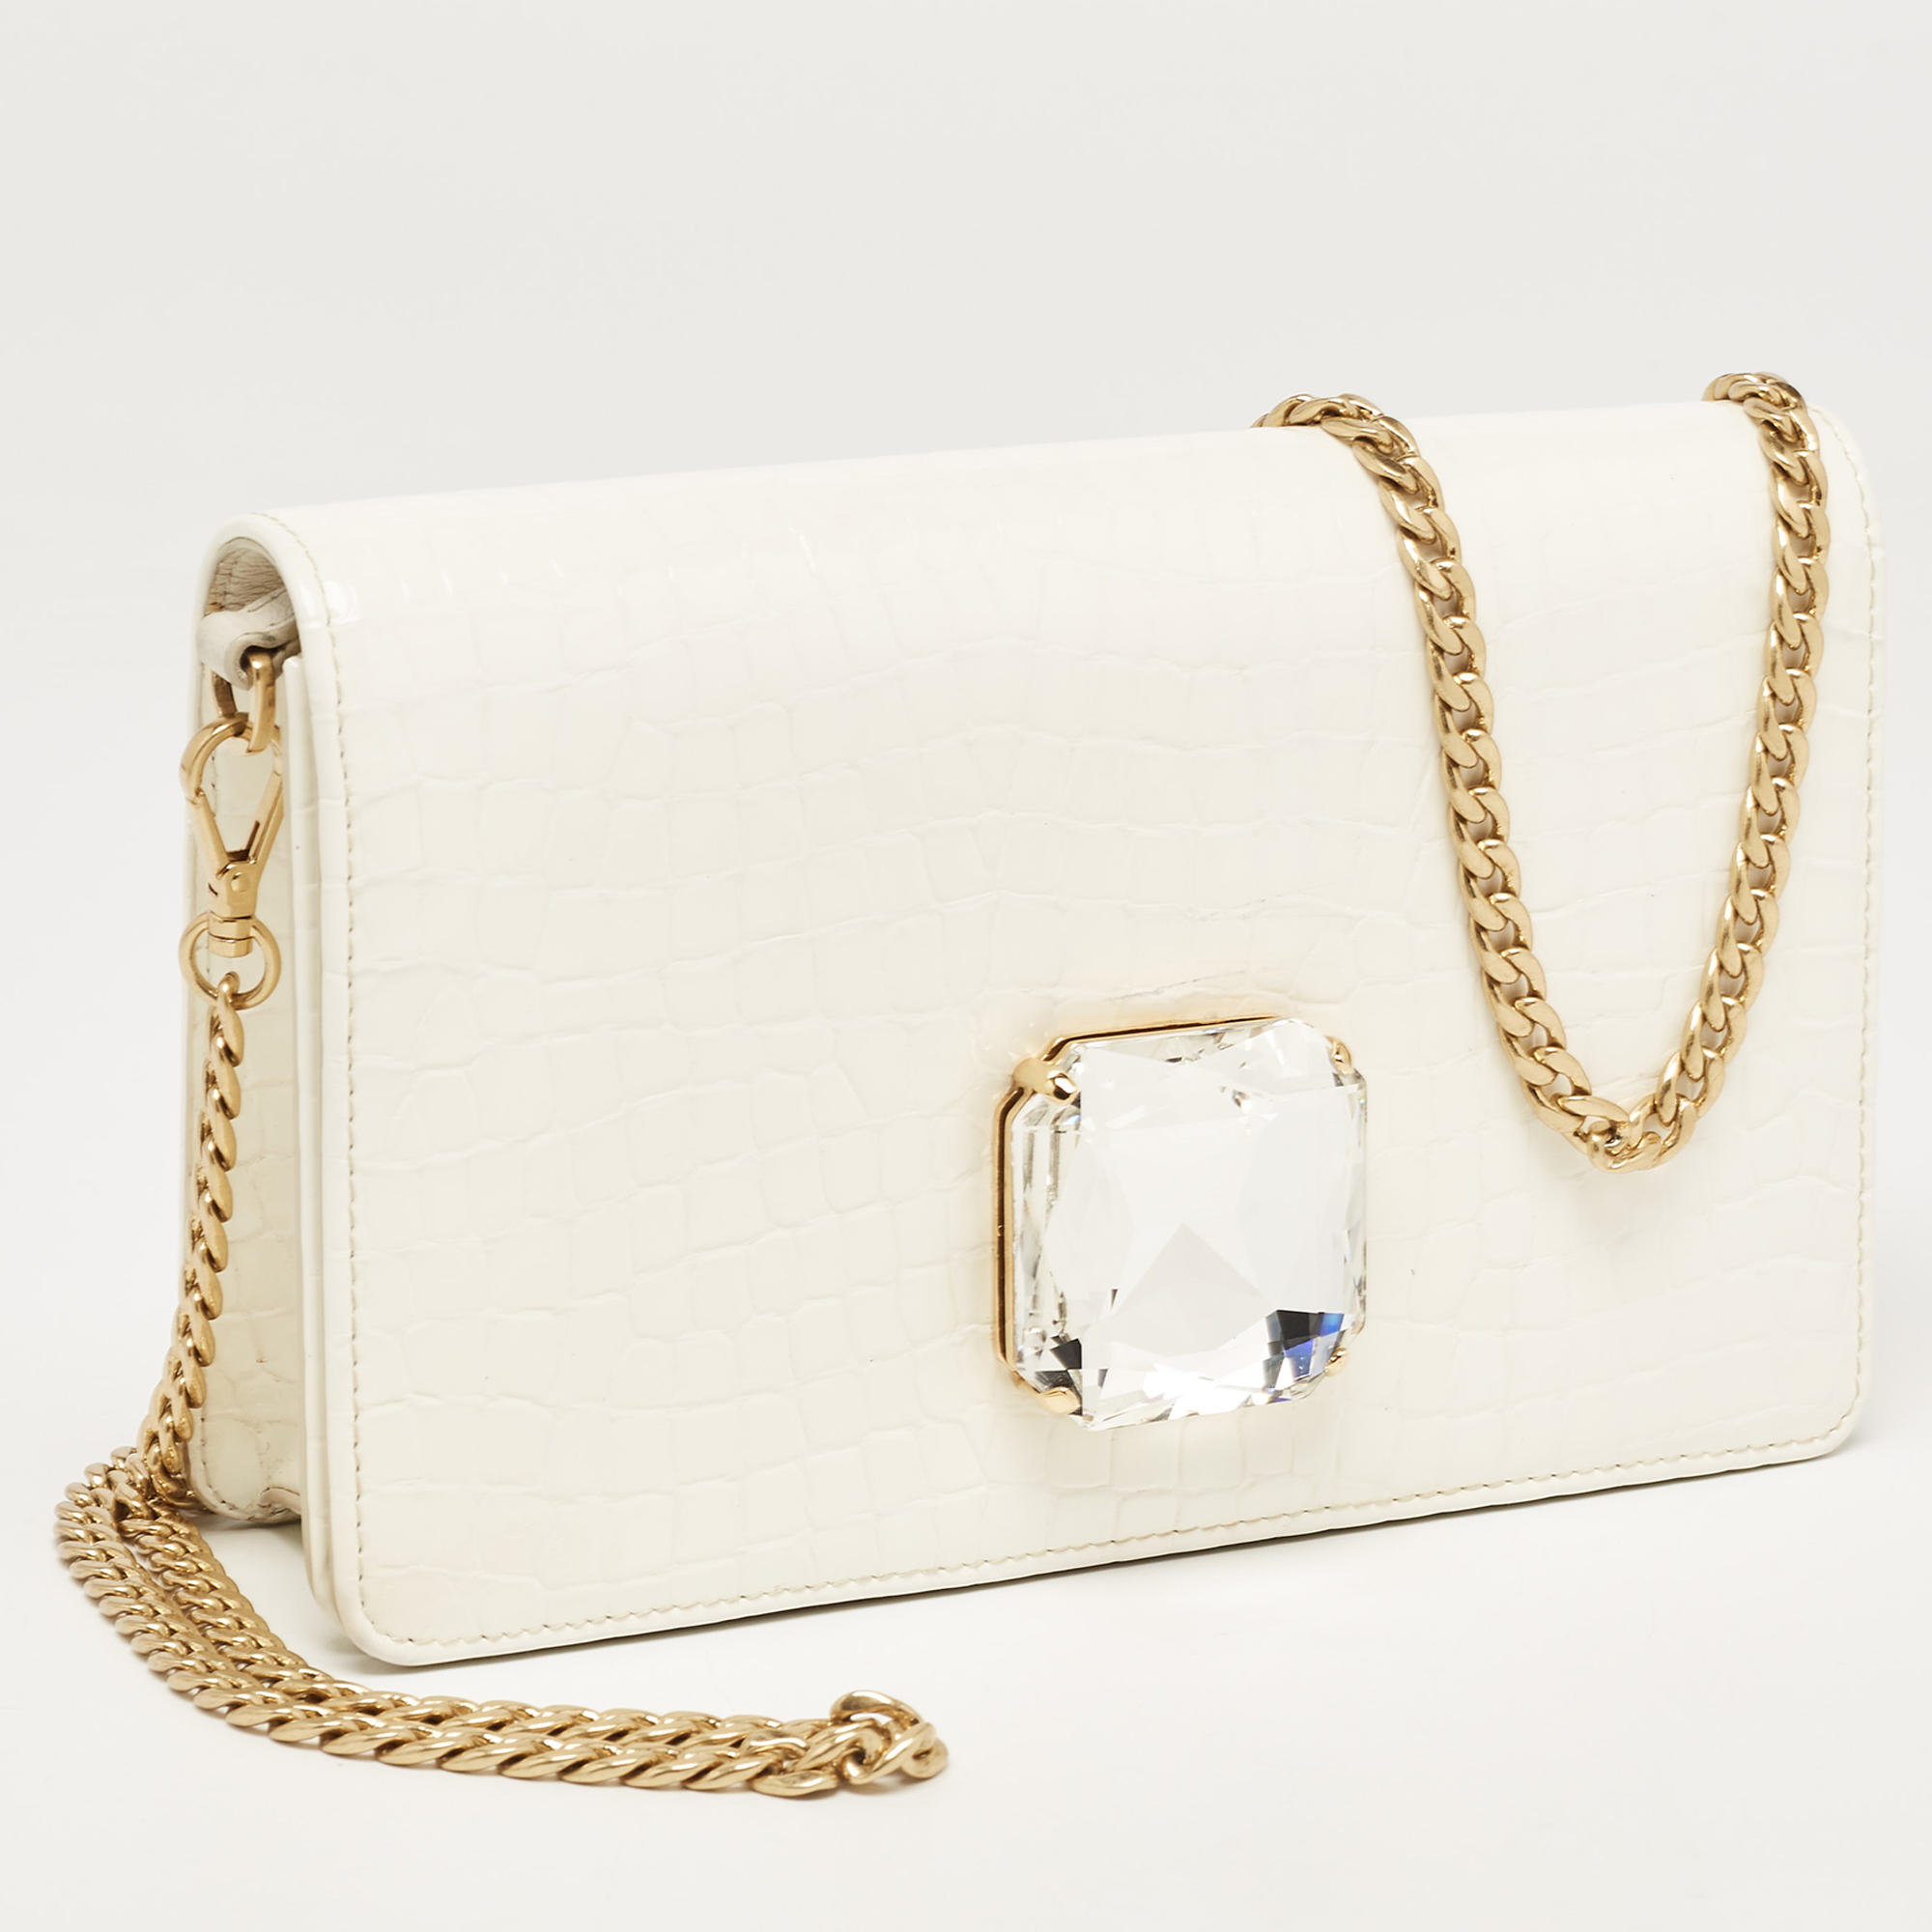 Miu Miu Off White Croc Embossed Leather Crystal Embellished Chain Clutch